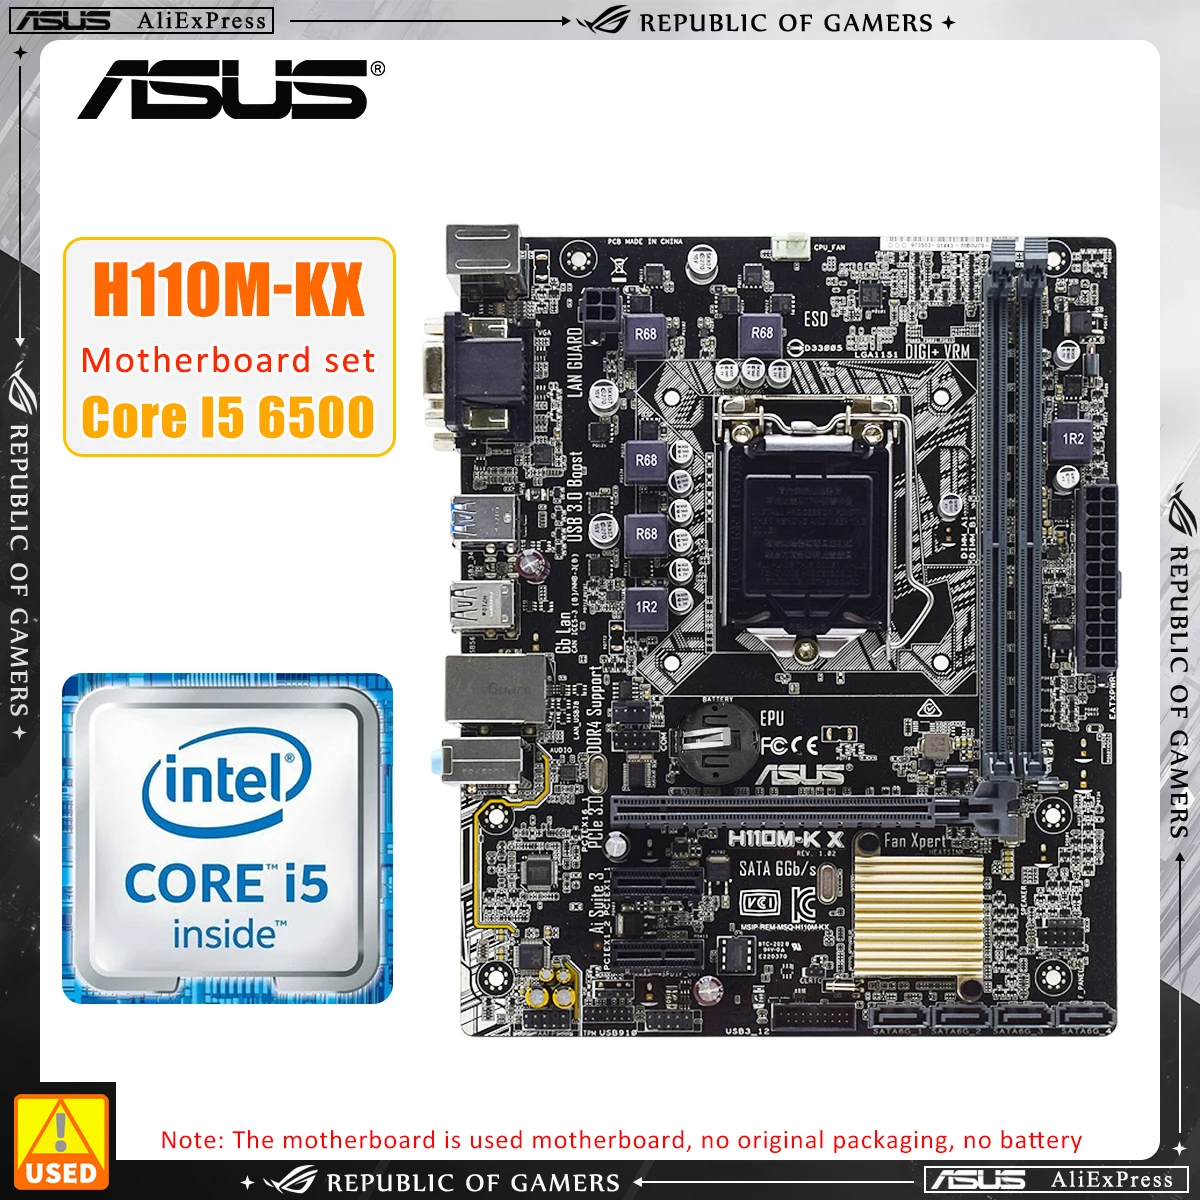 

ASUS H110M-K X+i5 6500 Motherboard KIt Supports Intel 6th and 7th generation Core processors using the LGA 1151 DDR4 32GB ATX